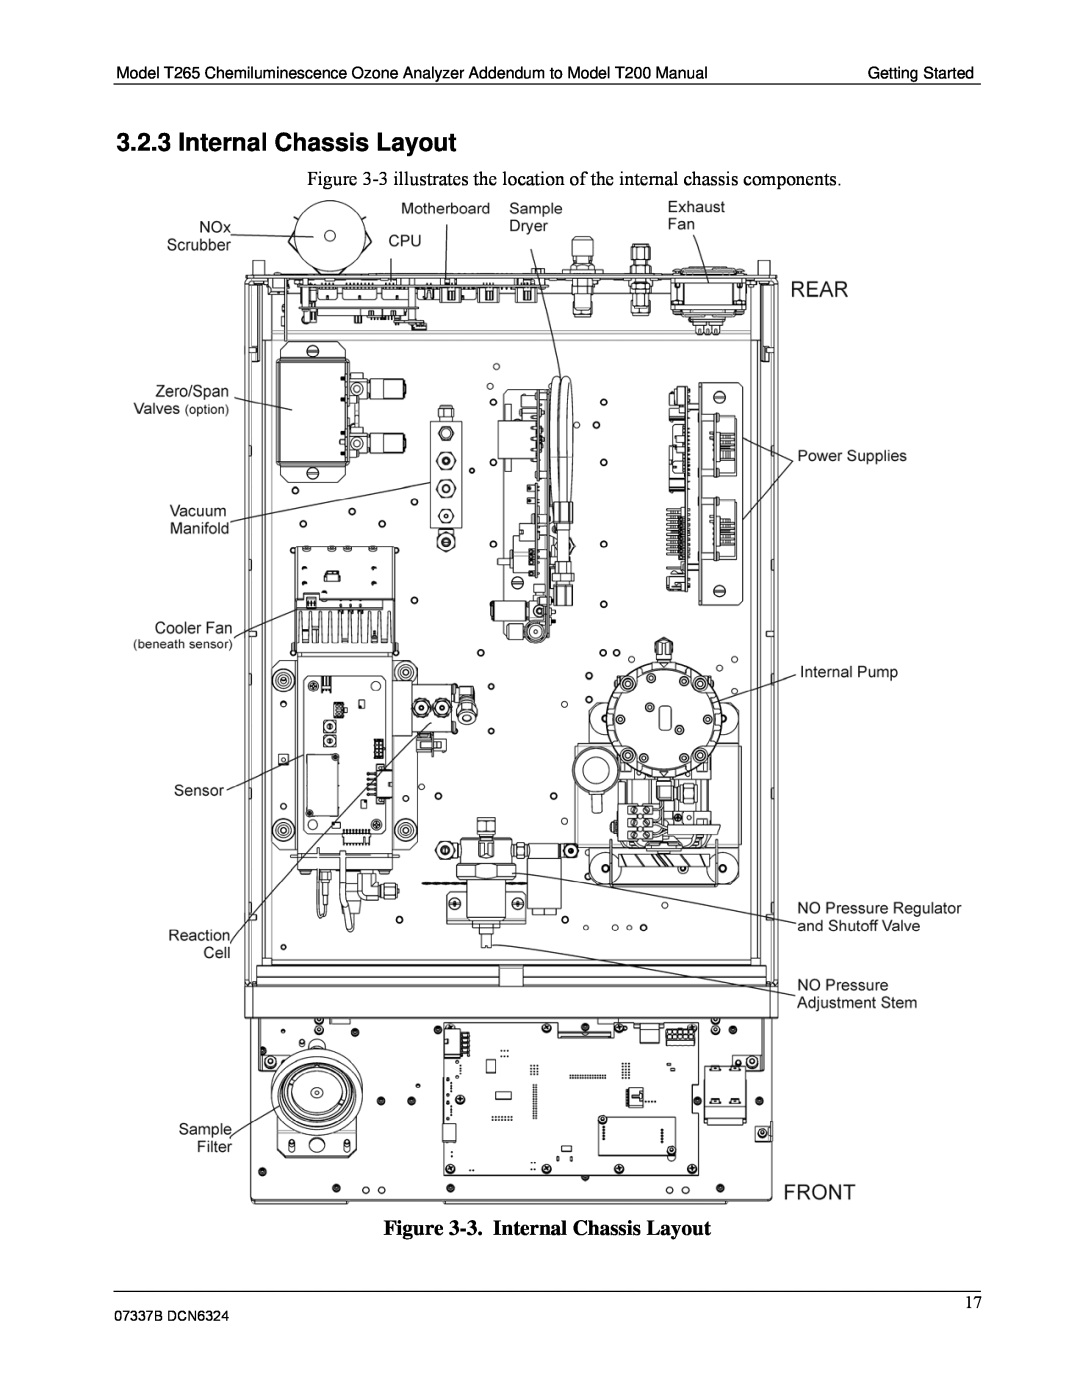 Teledyne T265 manual 3.Internal Chassis Layout, Getting Started, 07337B DCN6324 